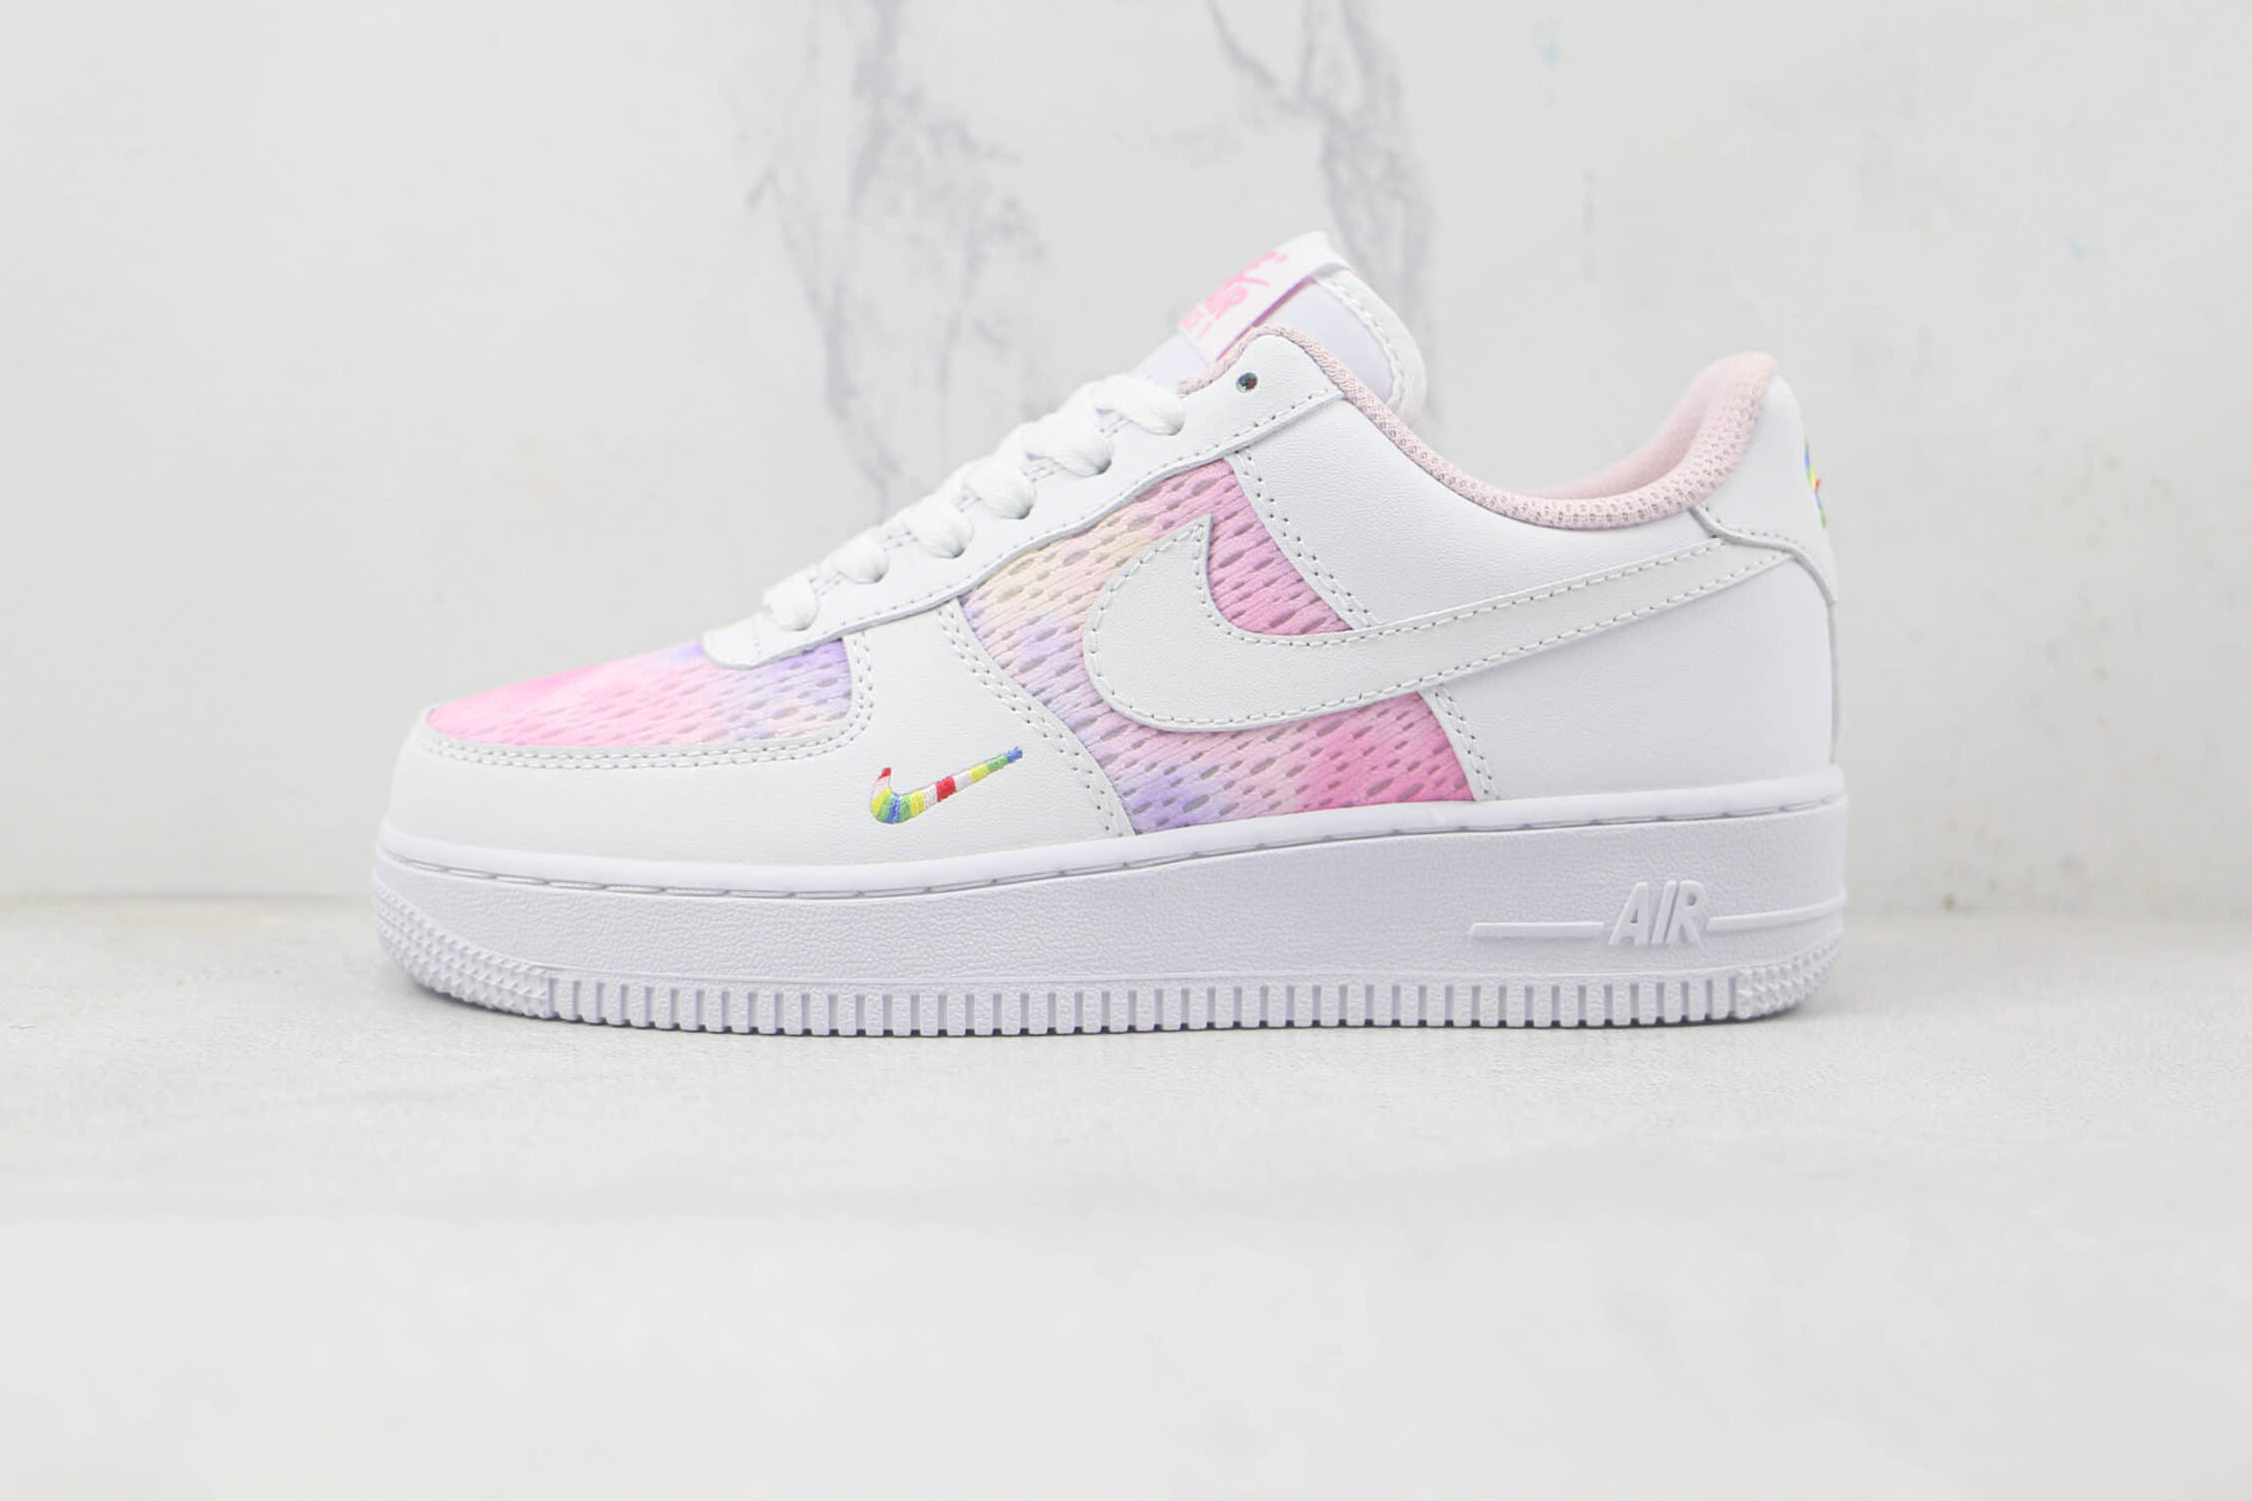 Nike Air Force 1 07 Low White Purple Pink Multi-Color CH3512-001 - Stylish and Versatile Sneakers